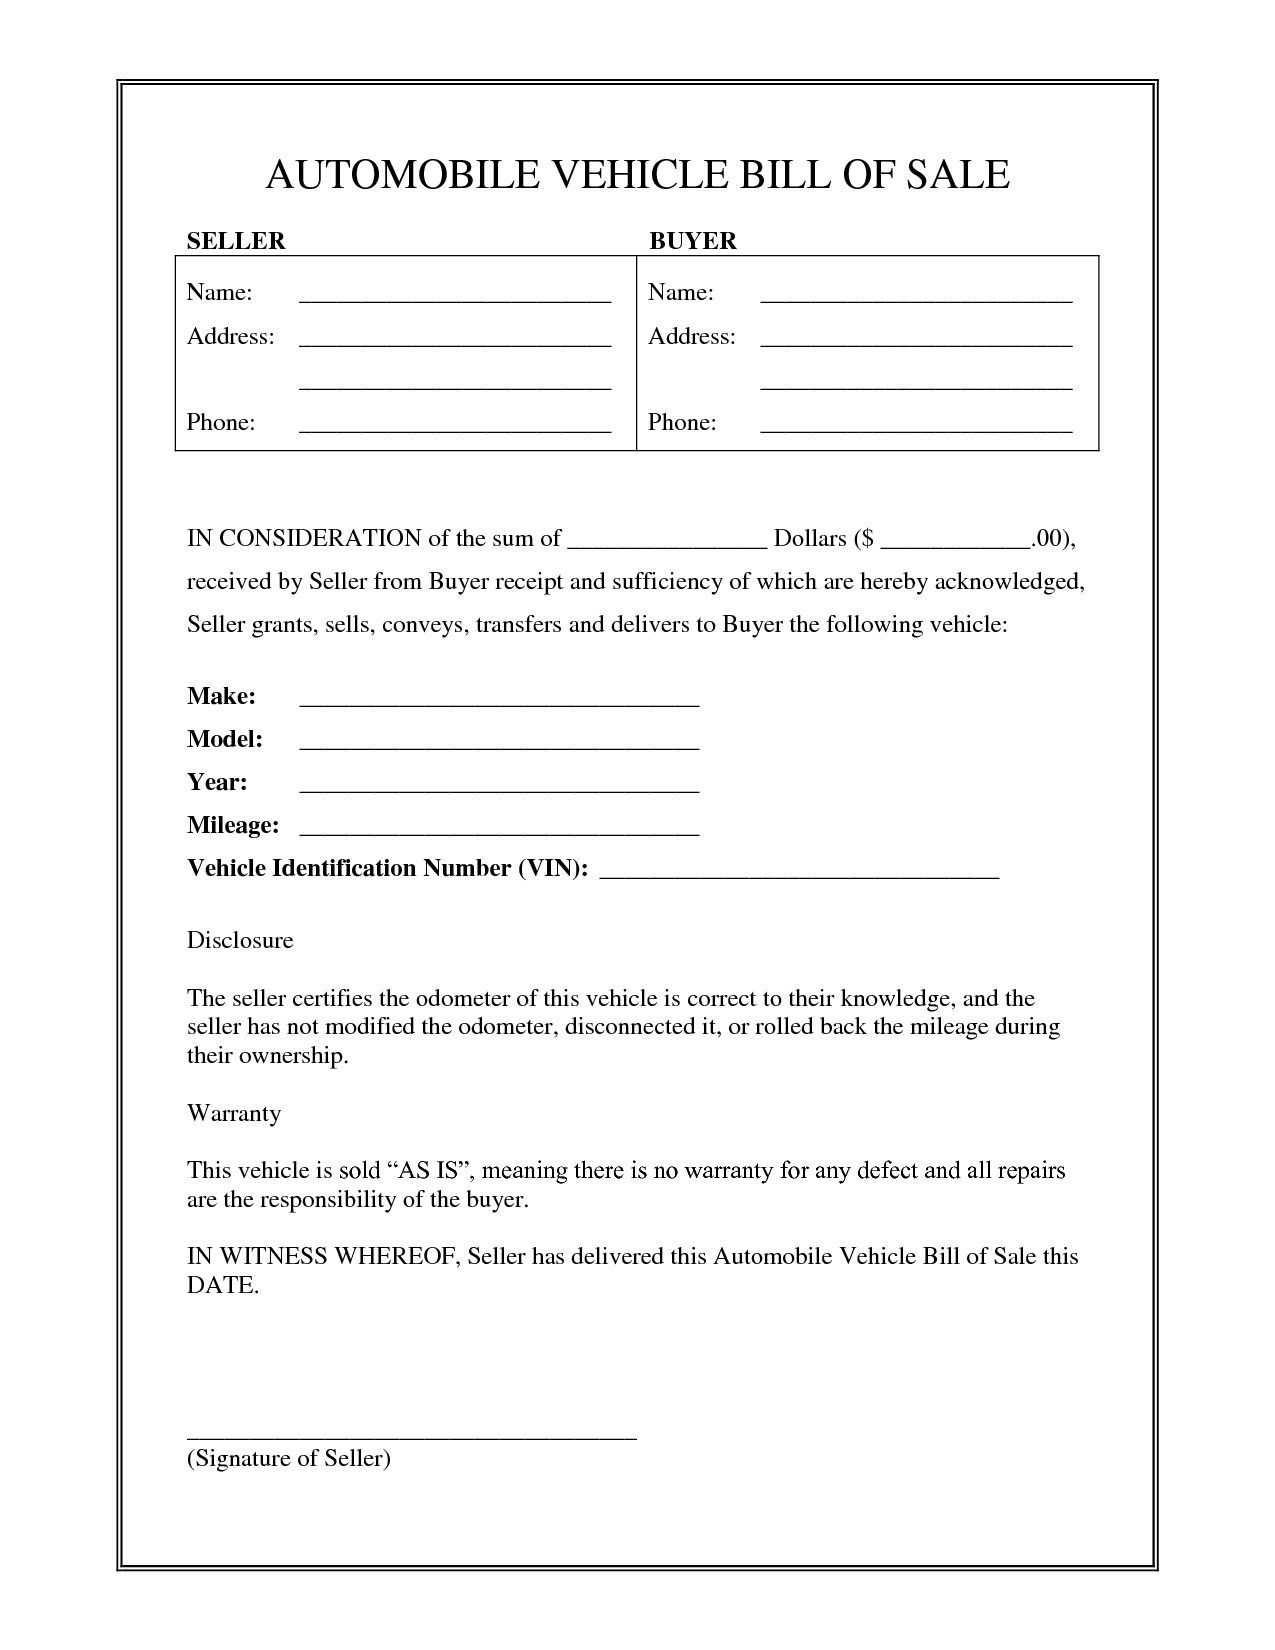 free template for car bill of sale pdf